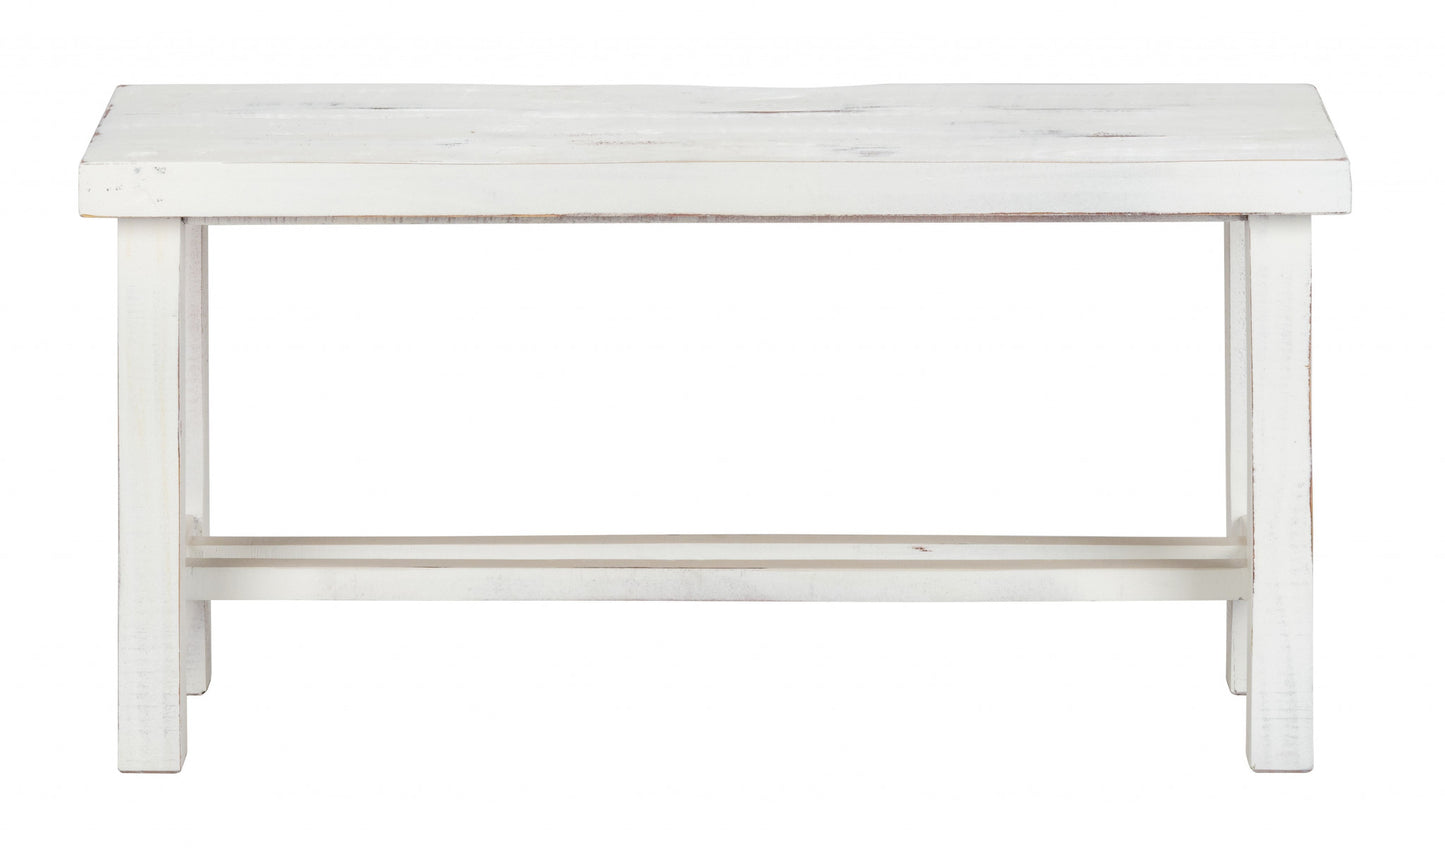 36" Rustic White Distressed Bench By Homeroots